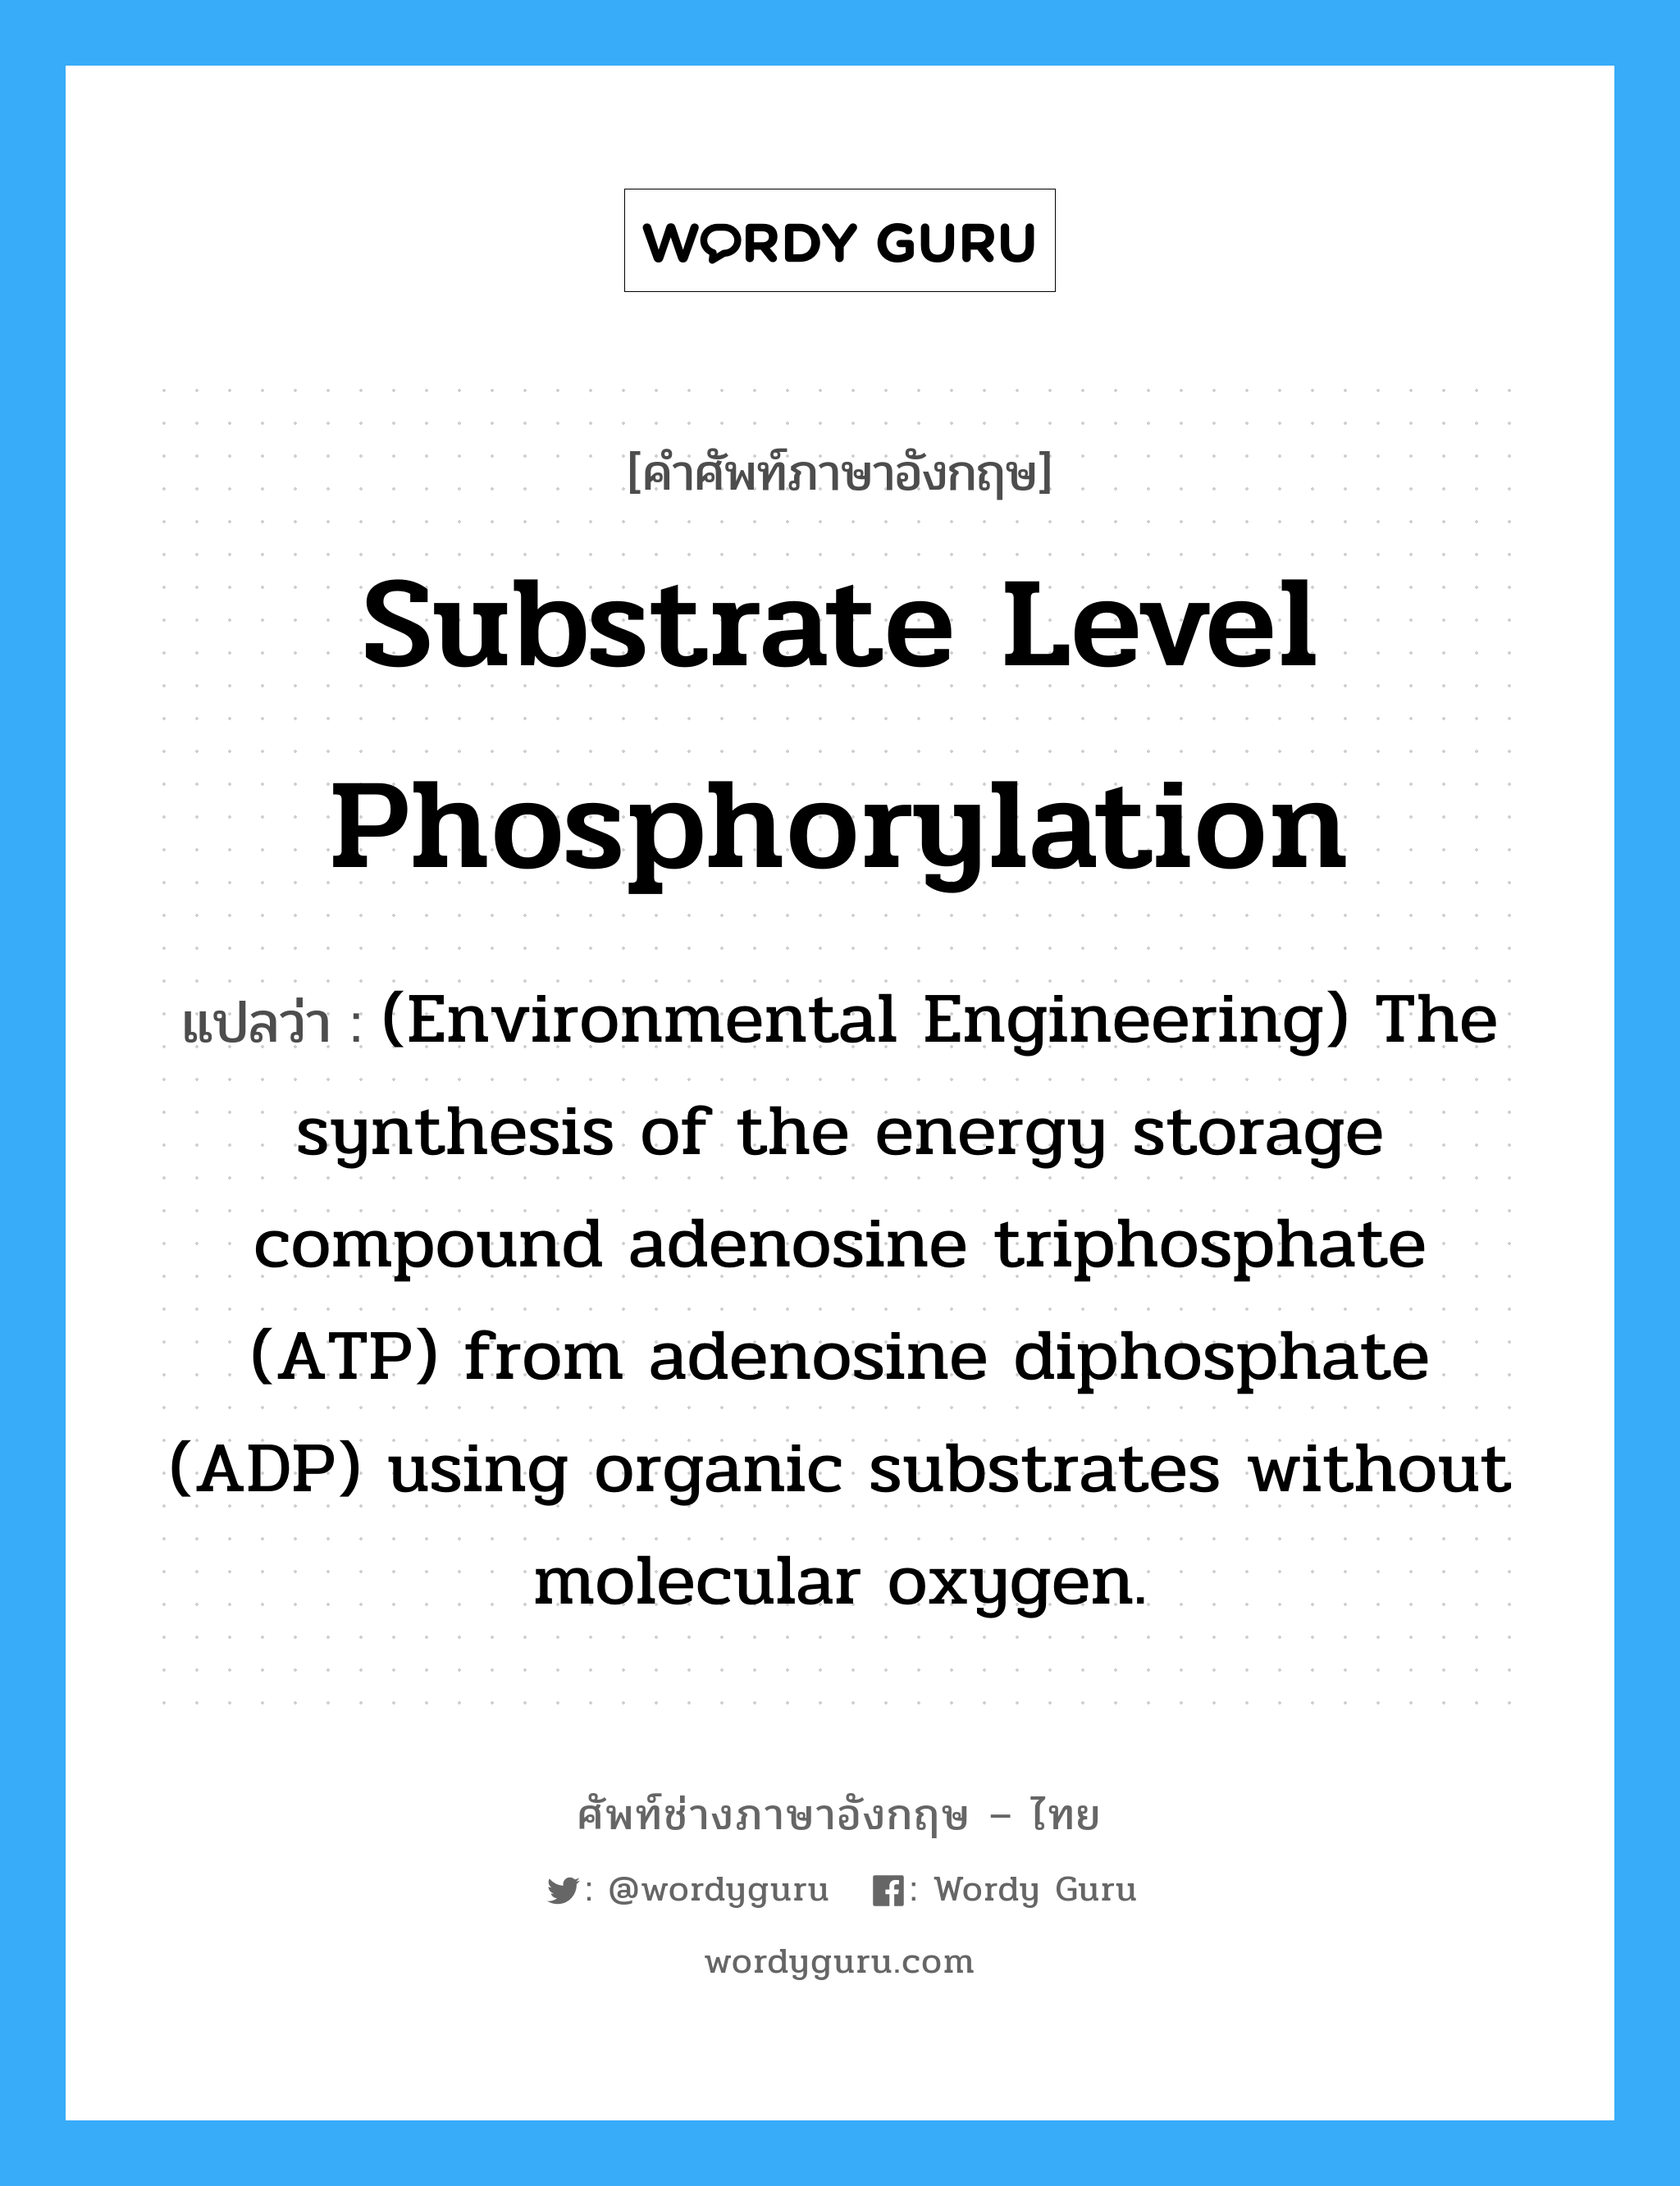 (Environmental Engineering) The synthesis of the energy storage compound adenosine triphosphate (ATP) from adenosine diphosphate (ADP) using a chemical substrate and molecular oxygen. ภาษาอังกฤษ?, คำศัพท์ช่างภาษาอังกฤษ - ไทย (Environmental Engineering) The synthesis of the energy storage compound adenosine triphosphate (ATP) from adenosine diphosphate (ADP) using organic substrates without molecular oxygen. คำศัพท์ภาษาอังกฤษ (Environmental Engineering) The synthesis of the energy storage compound adenosine triphosphate (ATP) from adenosine diphosphate (ADP) using organic substrates without molecular oxygen. แปลว่า Substrate level phosphorylation